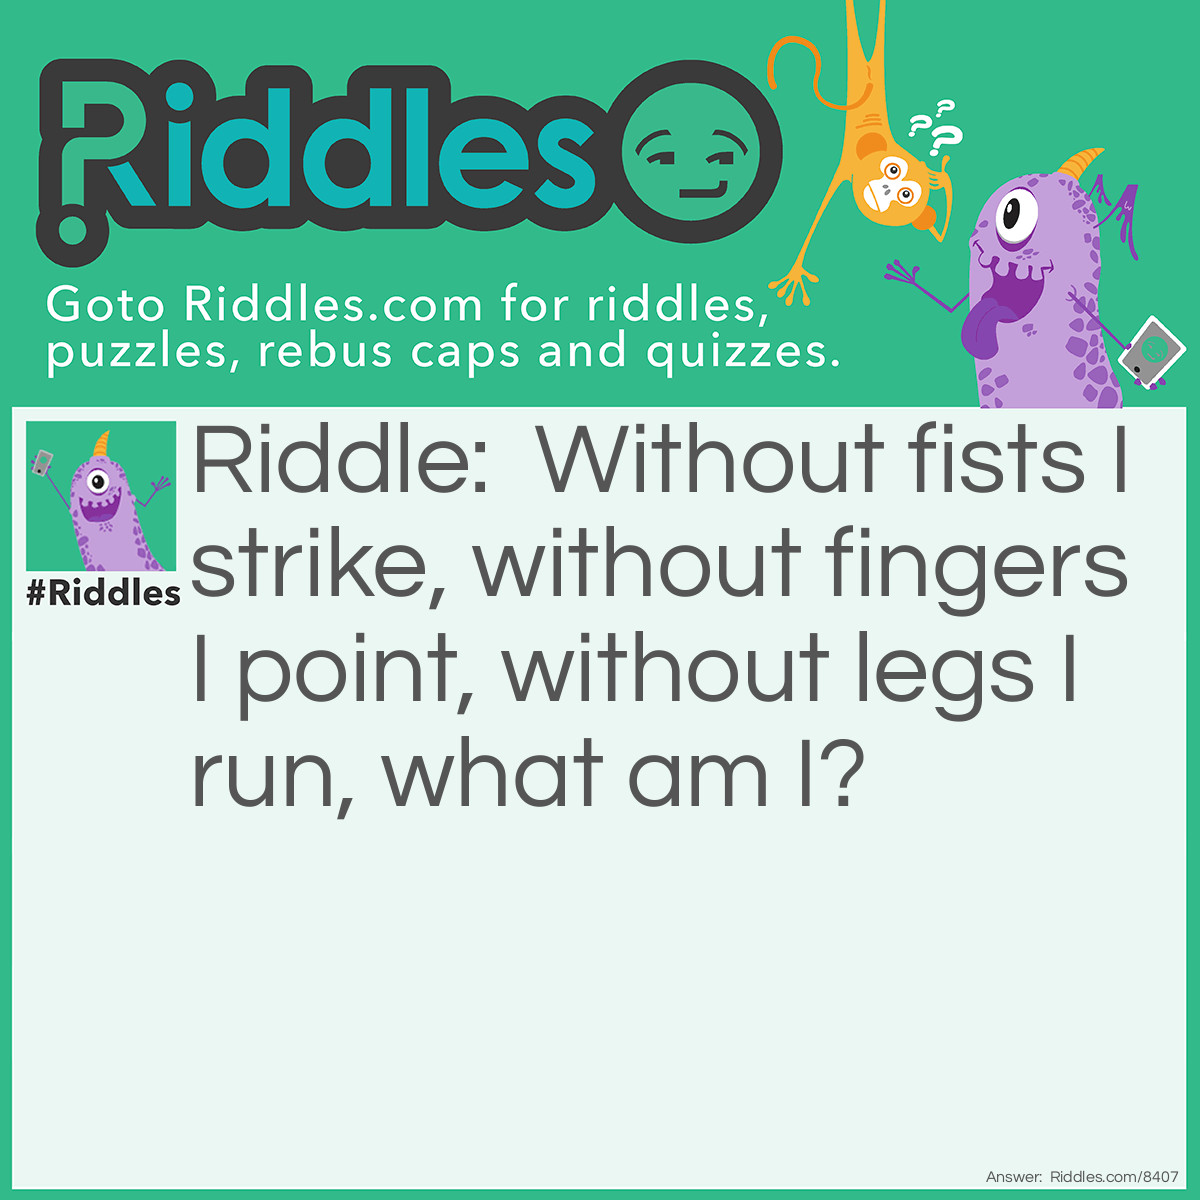 Riddle: Without fists I strike, without fingers, I point, without legs, I run. What am I? Answer: A clock.